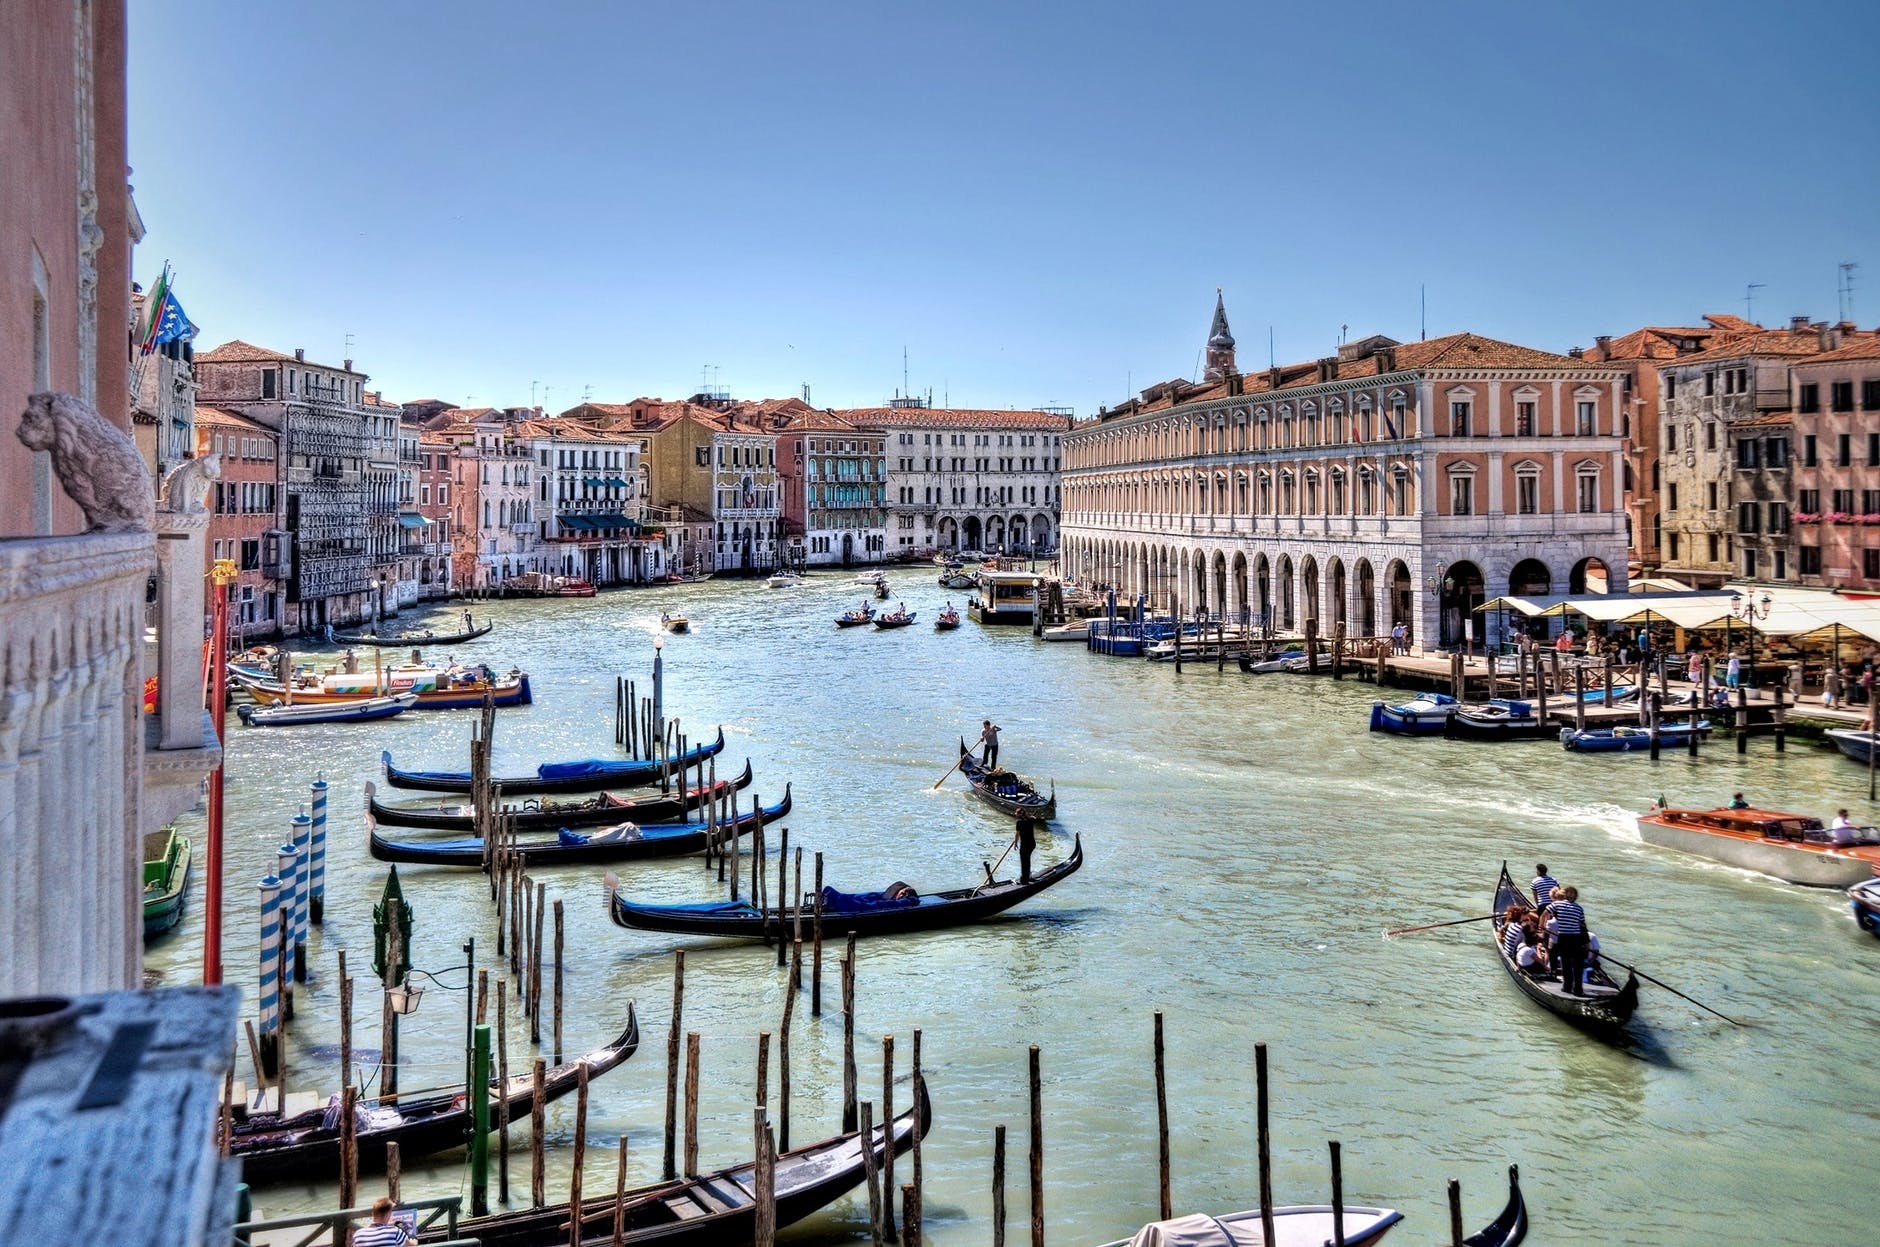 An image of gondolas on a big expanse of water, and tall buildings along the sides. Venice, Italy